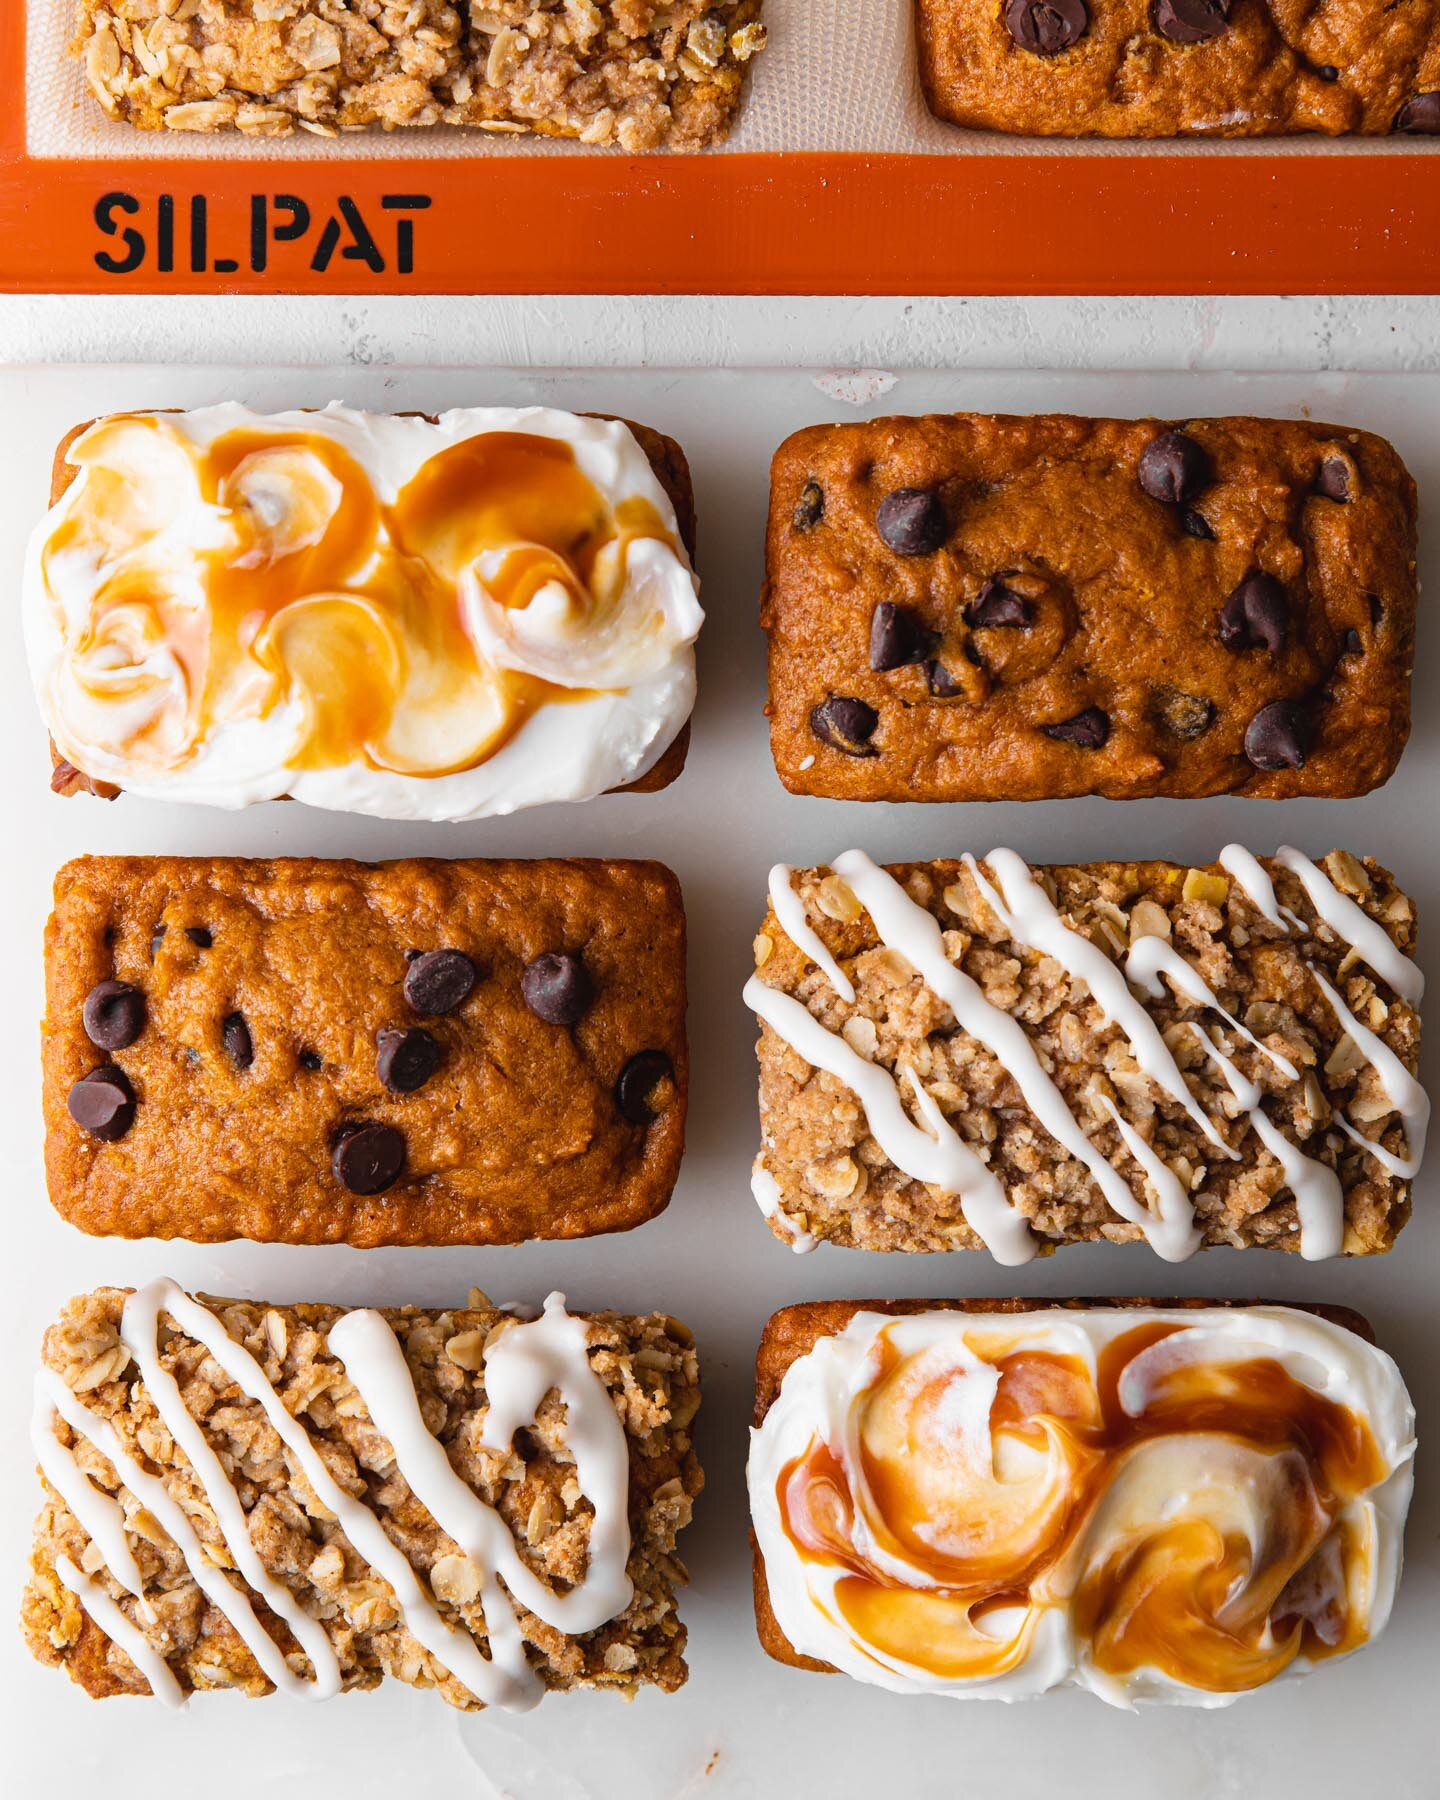 Pumpkin Mini Loaf Cakes with three different flavors and toppings